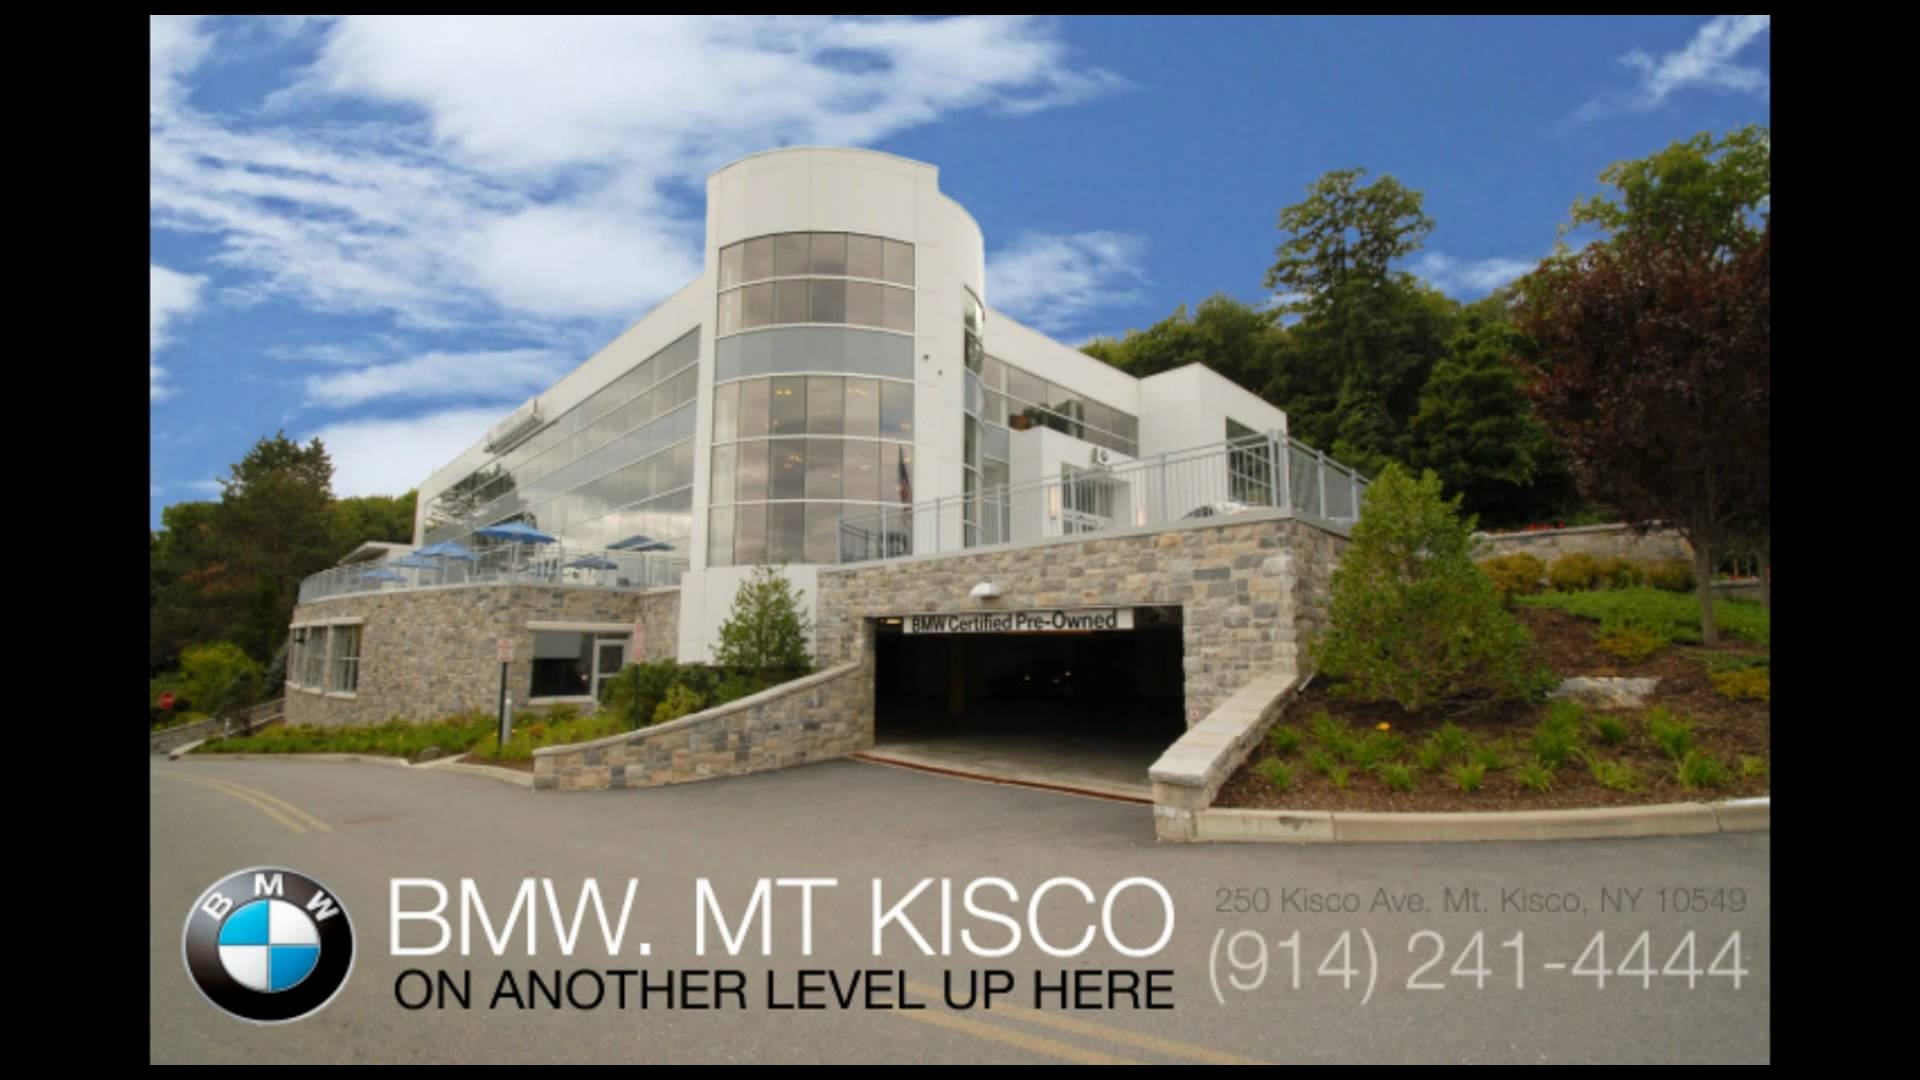 Service Up At BMW Mount Kisco Raising the Standard